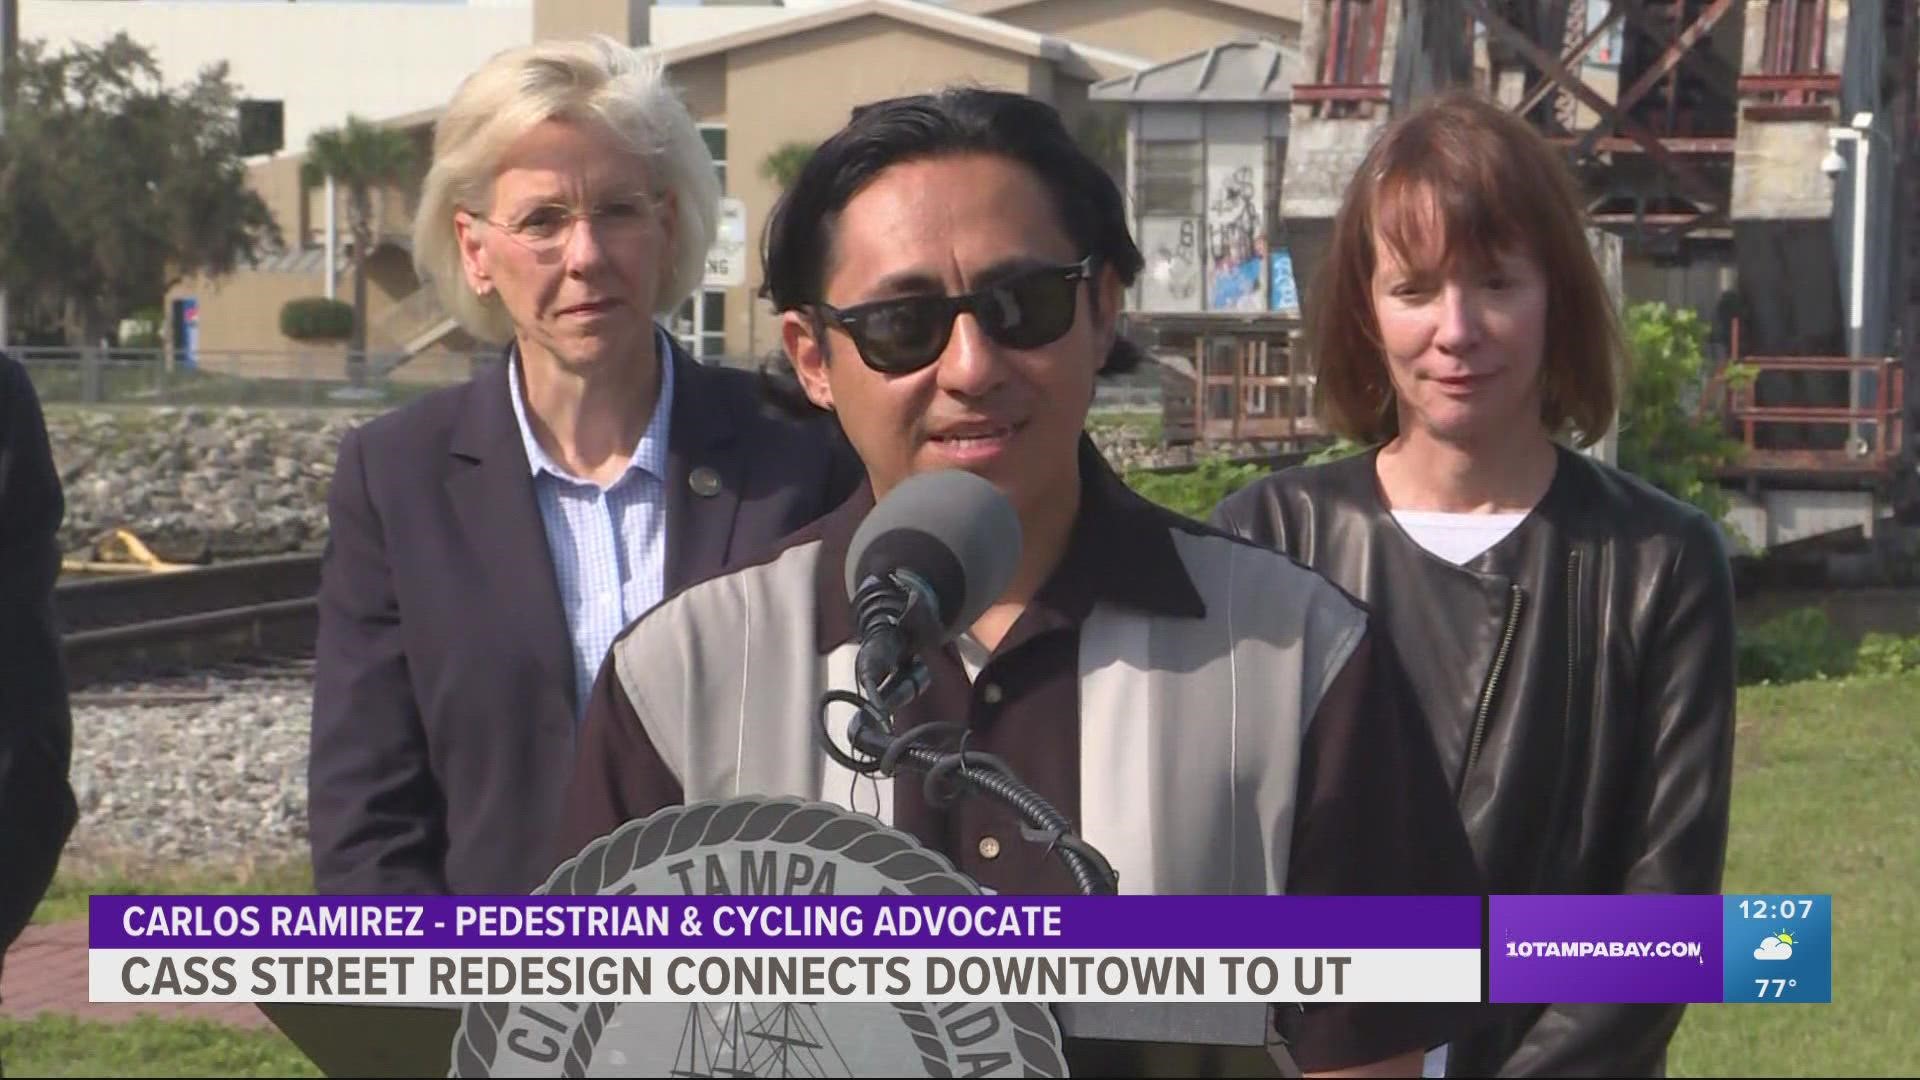 Officials say the goal of the redesign is to improve traffic and connect communities and provide safer routes for people walking and on bikes.